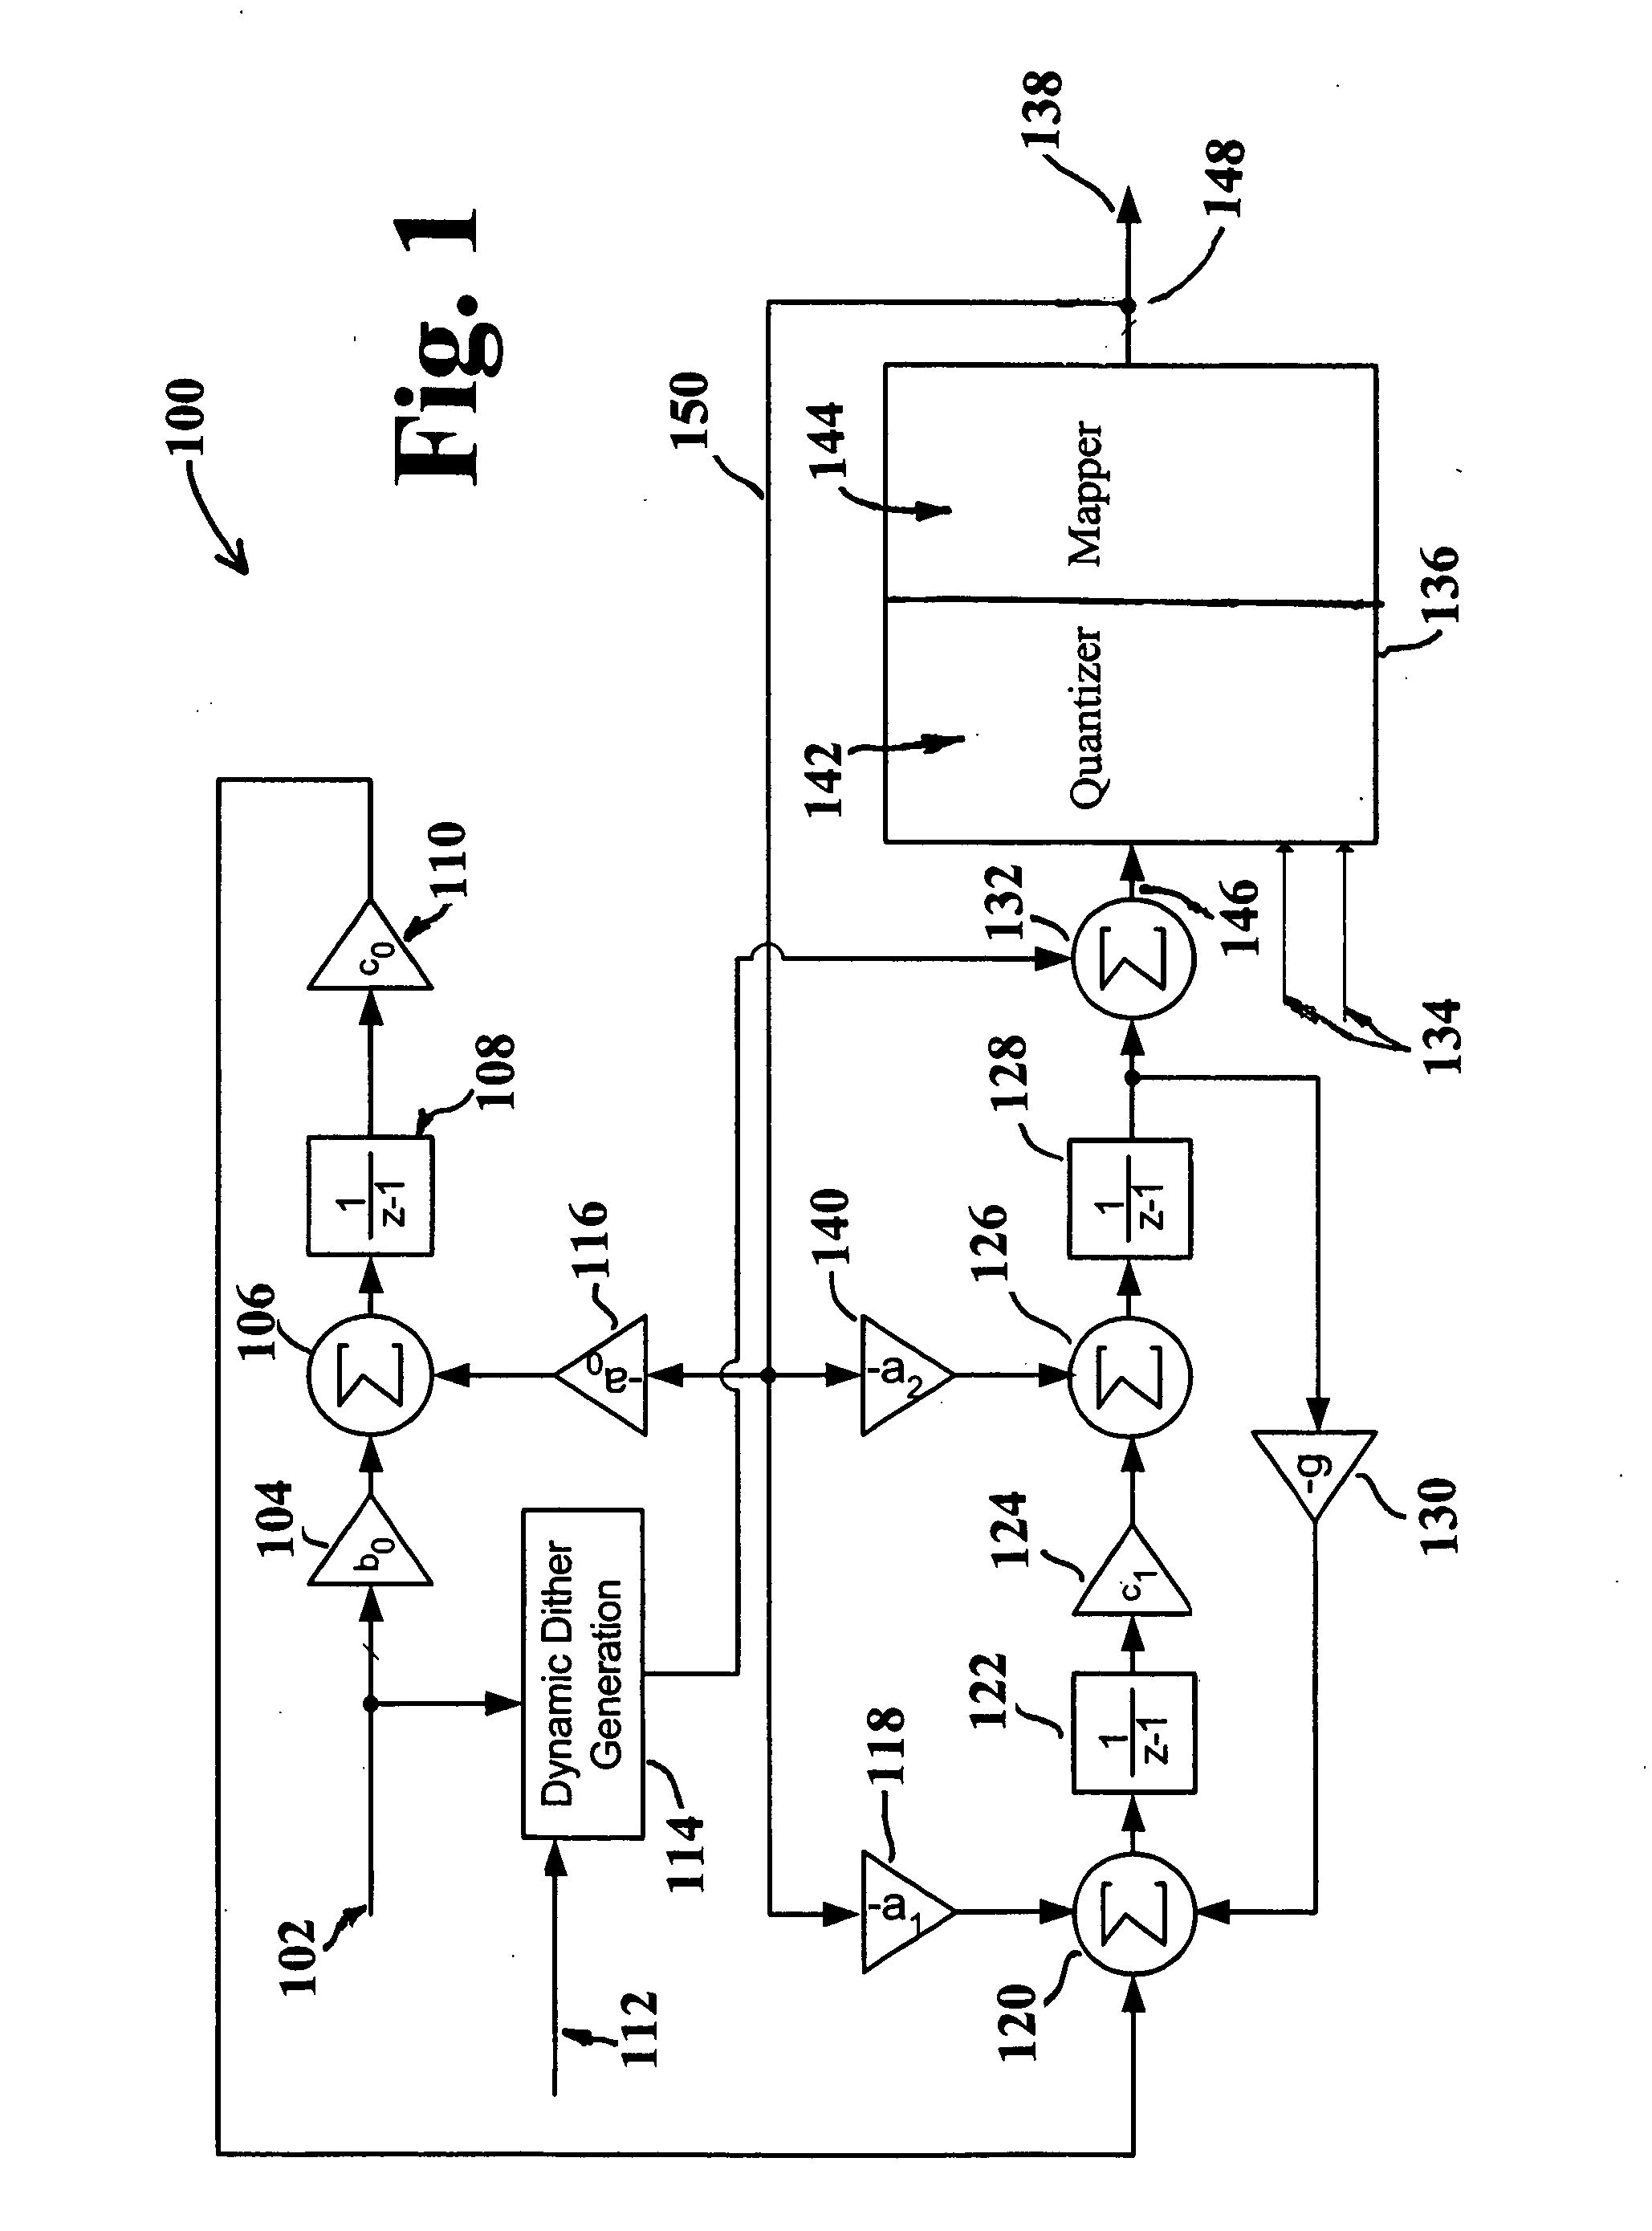 System and method for shuffling mapping sequences